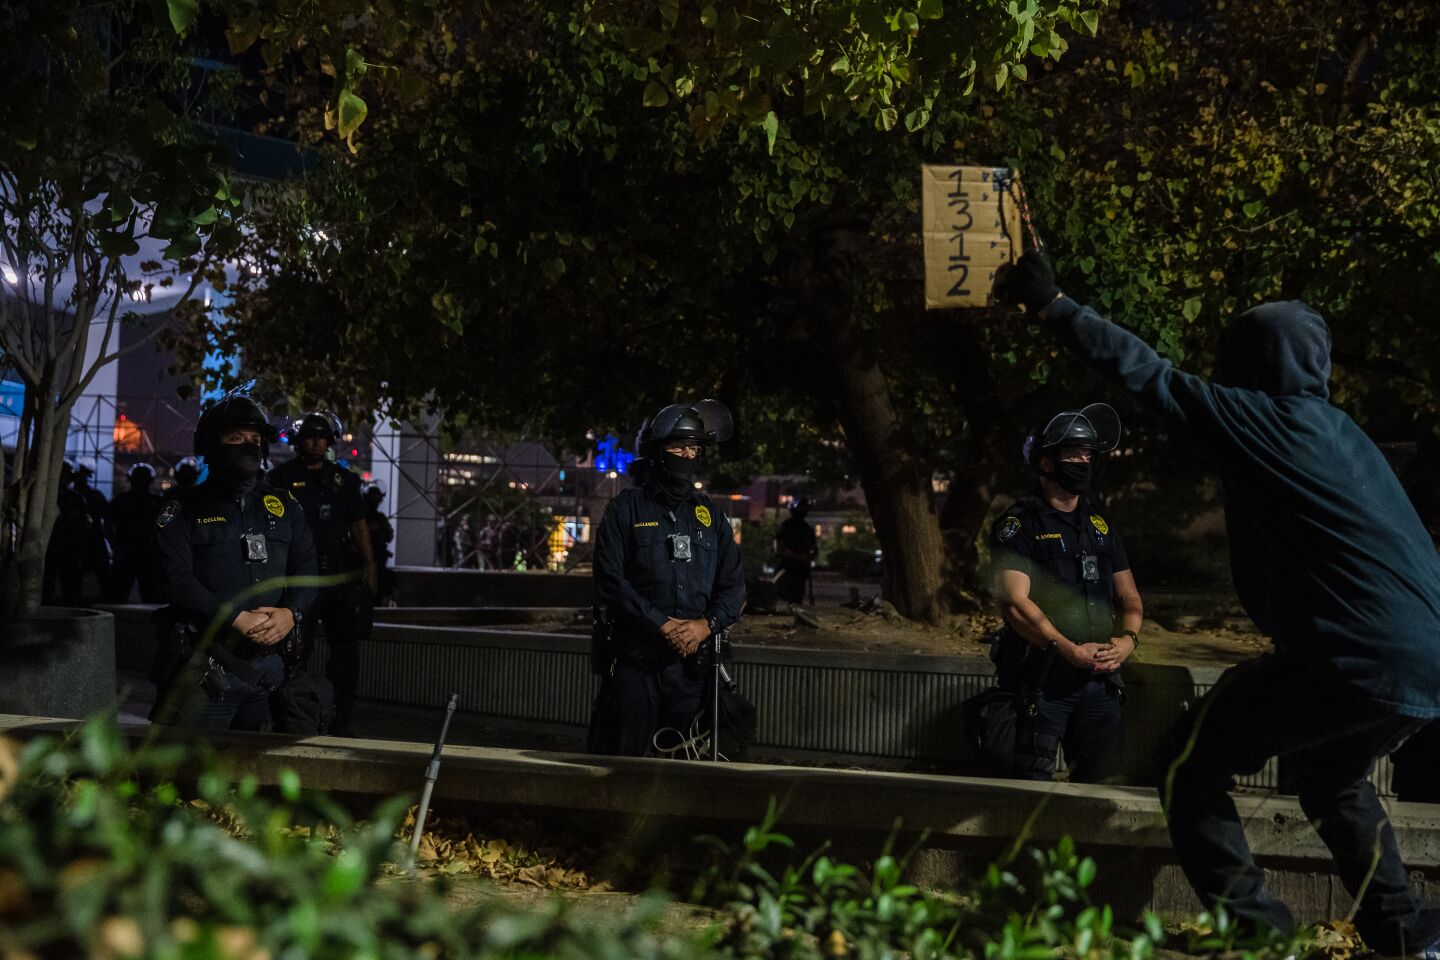 A protester waves a sign in front of police officers after protesters pushed down a barricade at the San Diego Police Department headquarters on September 23, 2020.